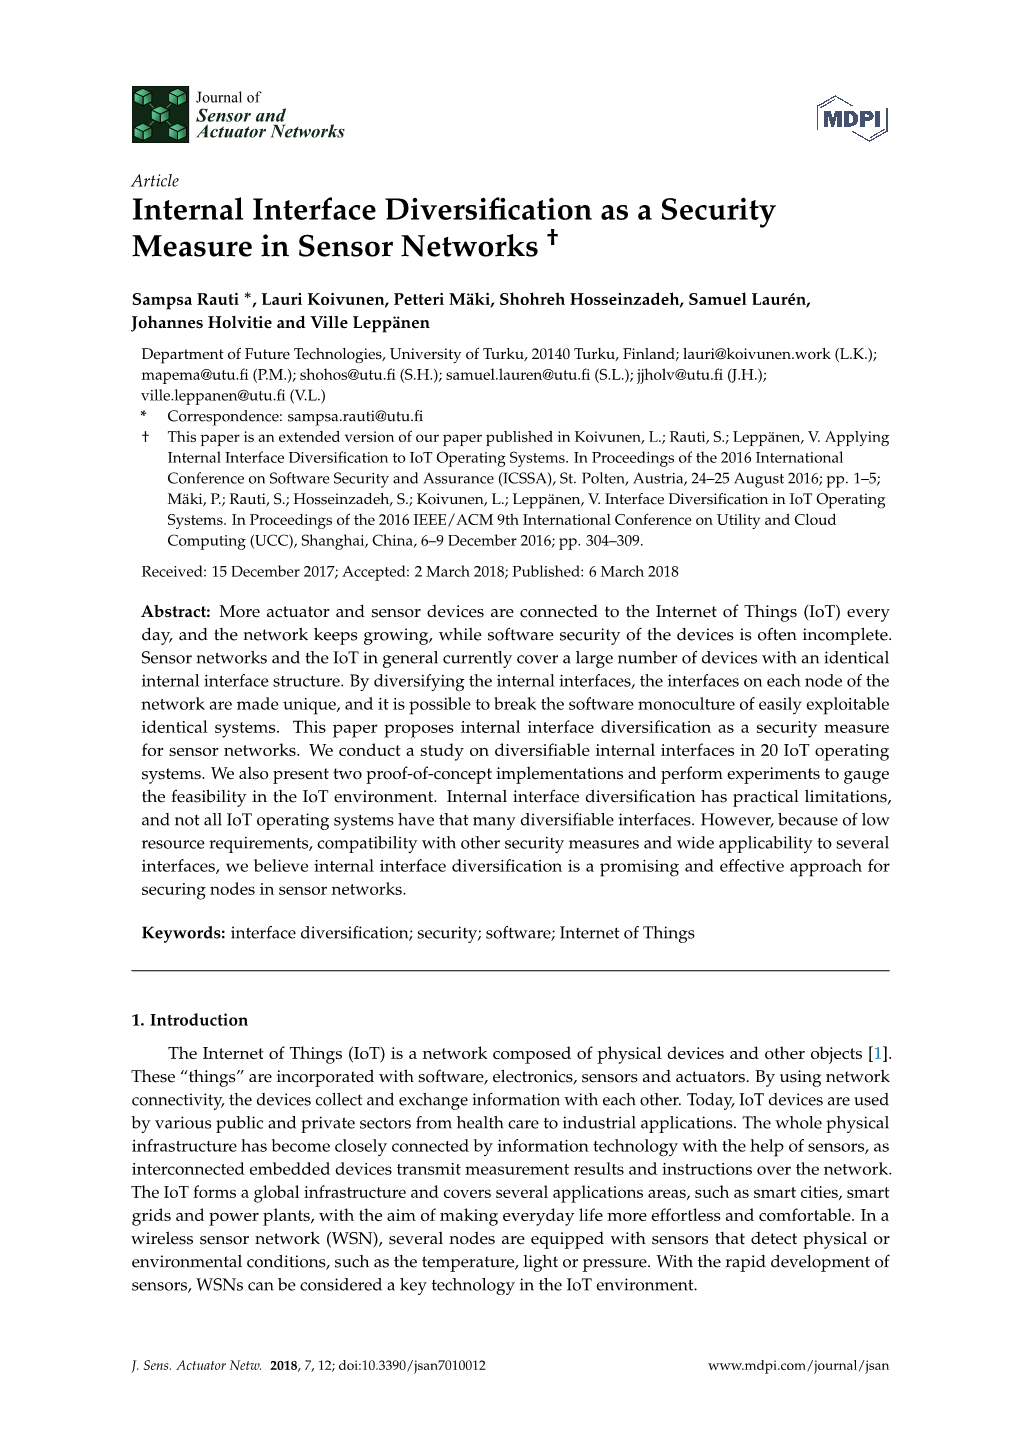 Internal Interface Diversification As a Security Measure in Sensor Networks